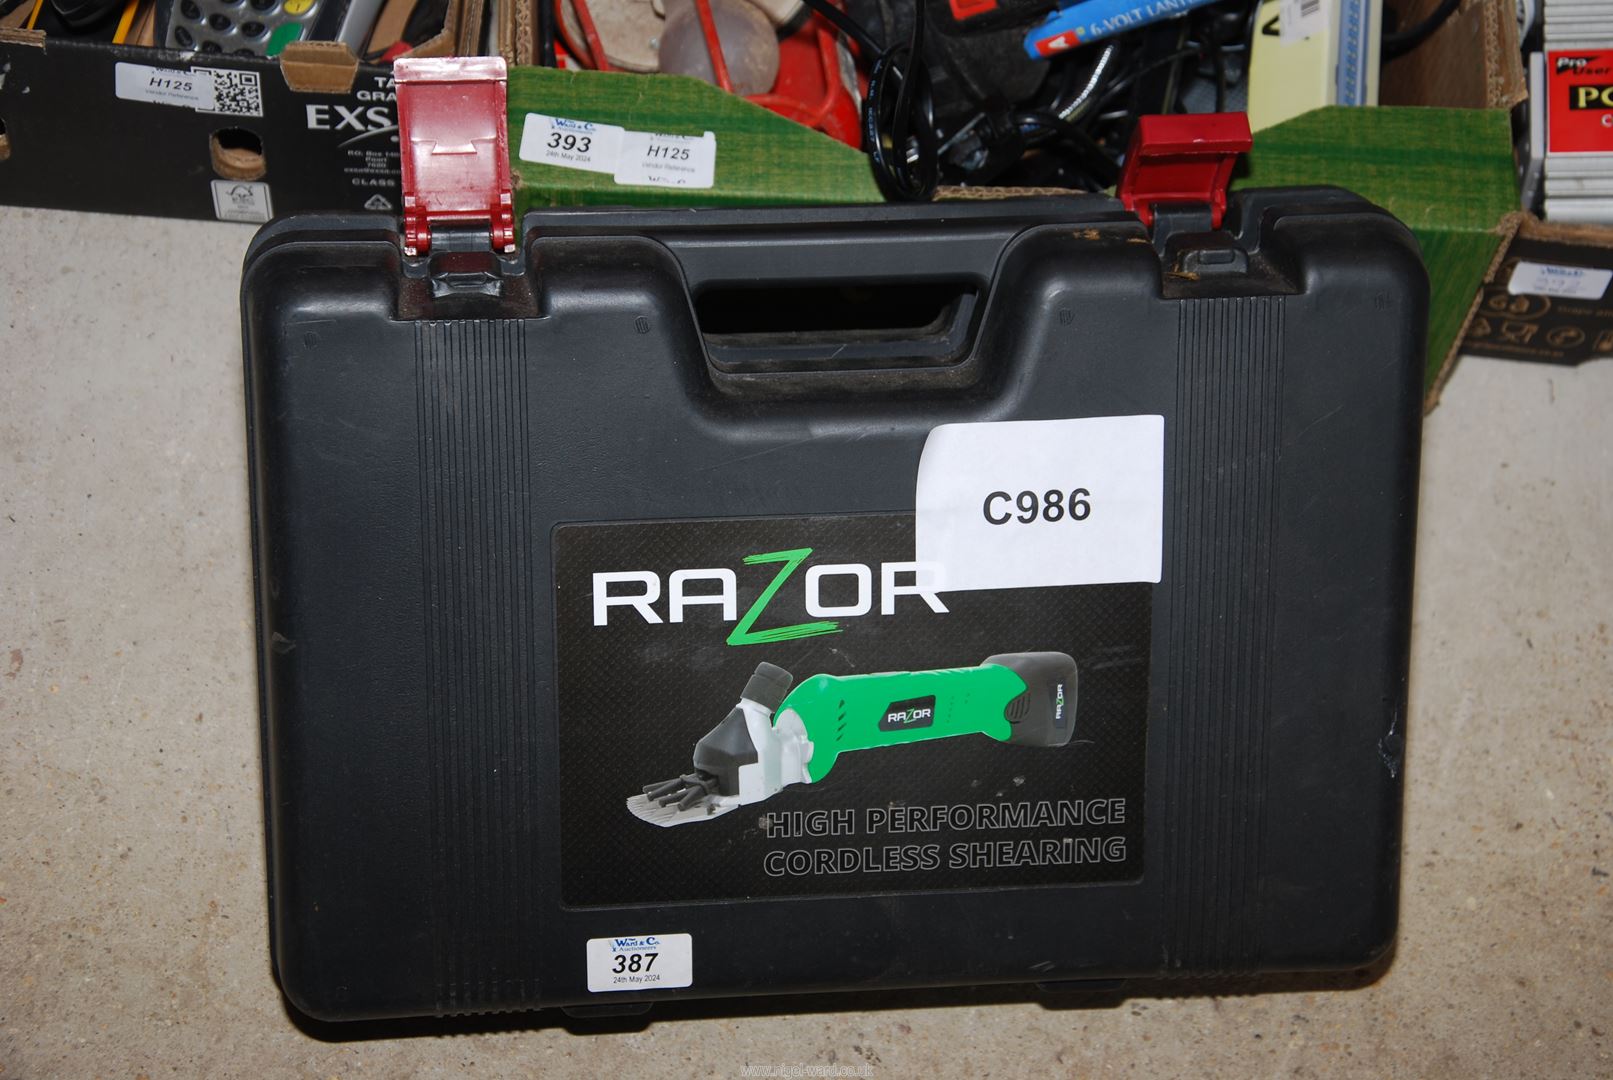 A "Razor" Sheep shearer, cordless, with manual, good working order. - Image 2 of 2